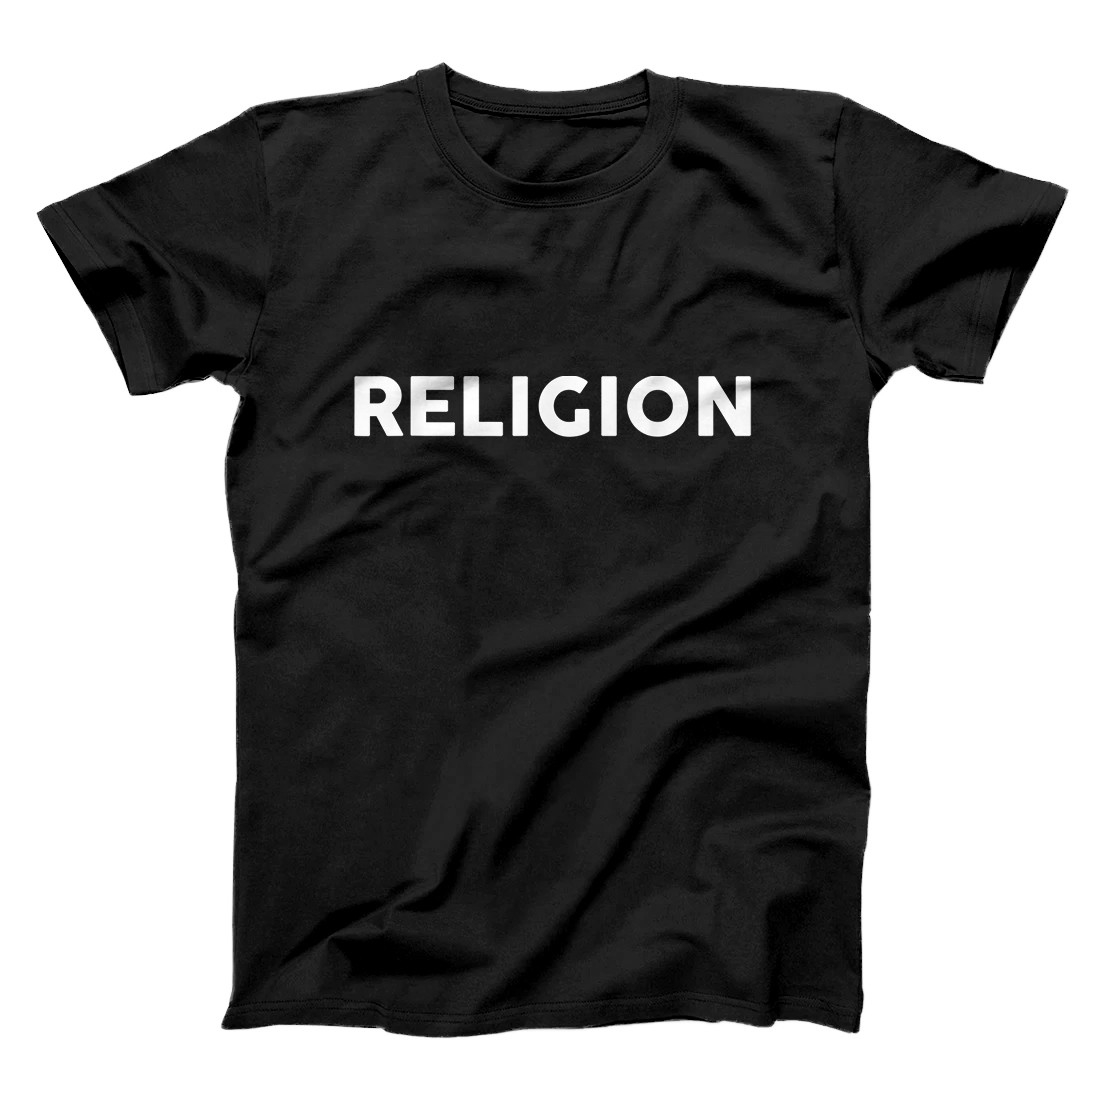 Personalized Shirt That Says RELIGION T-Shirt Simple Thanksgiving T-Shirt